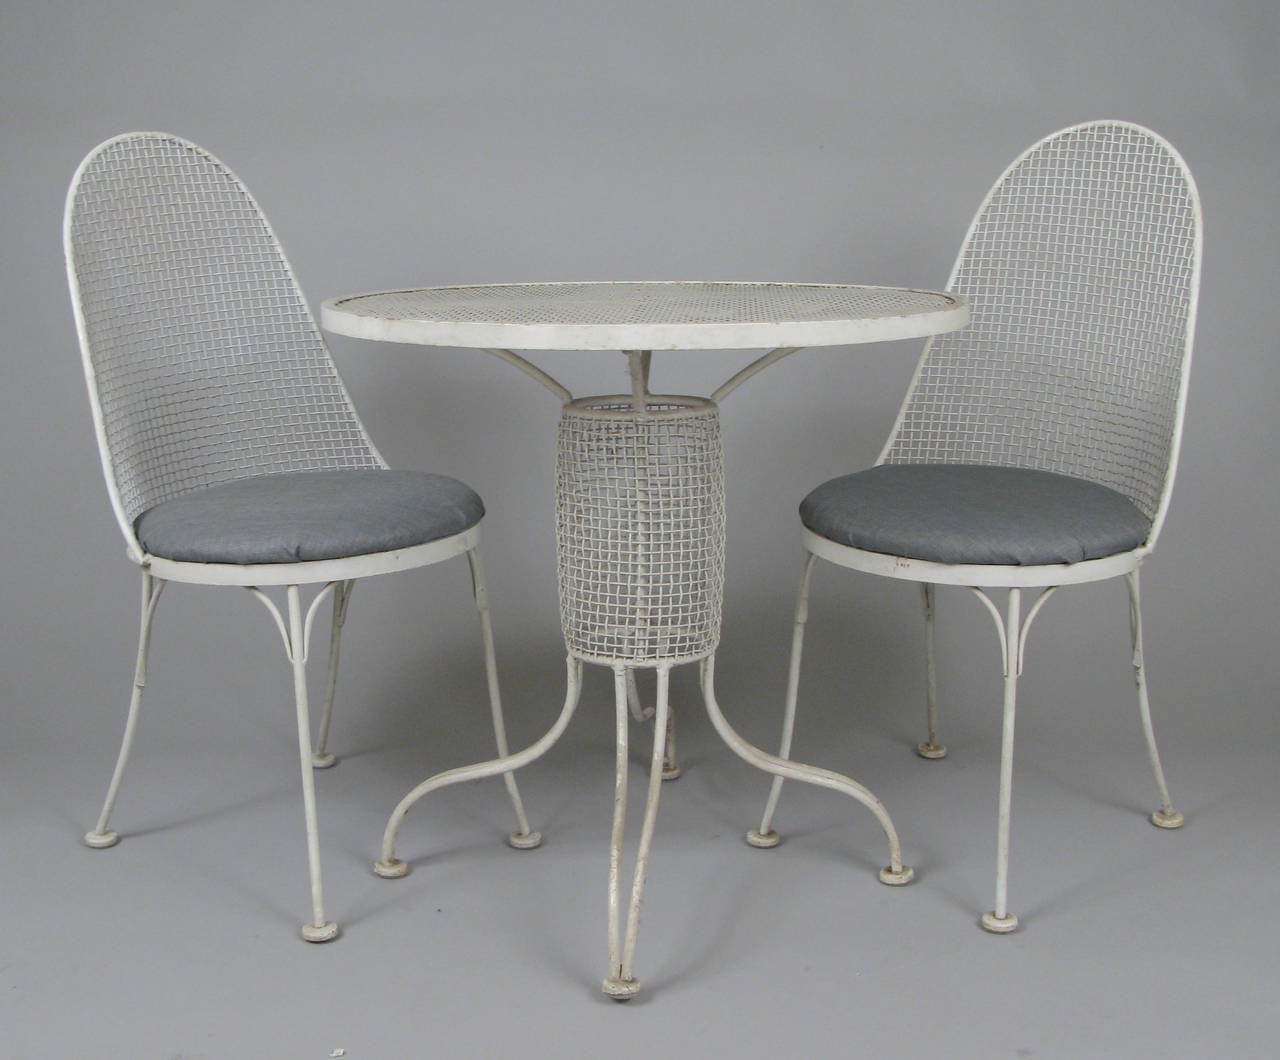 A rare set of sculpture high back chairs by Russell Woodard, along with a sculpture table with the woven mesh detailing around the center column of the table. Very nice size and scale.

The table is 30